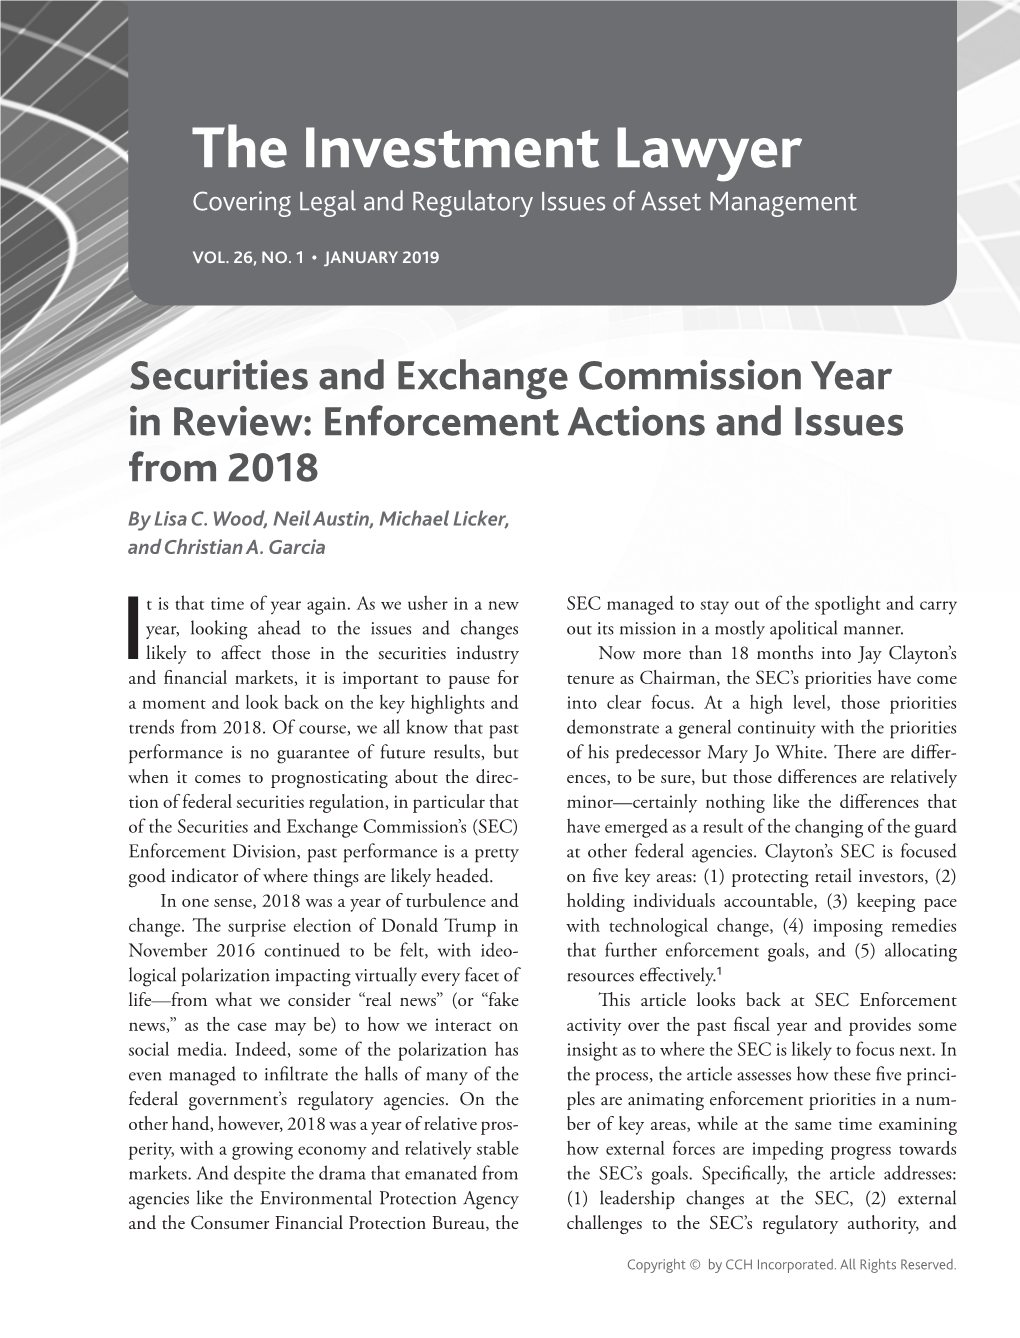 The Investment Lawyer: Securities and Exchange Commission Year